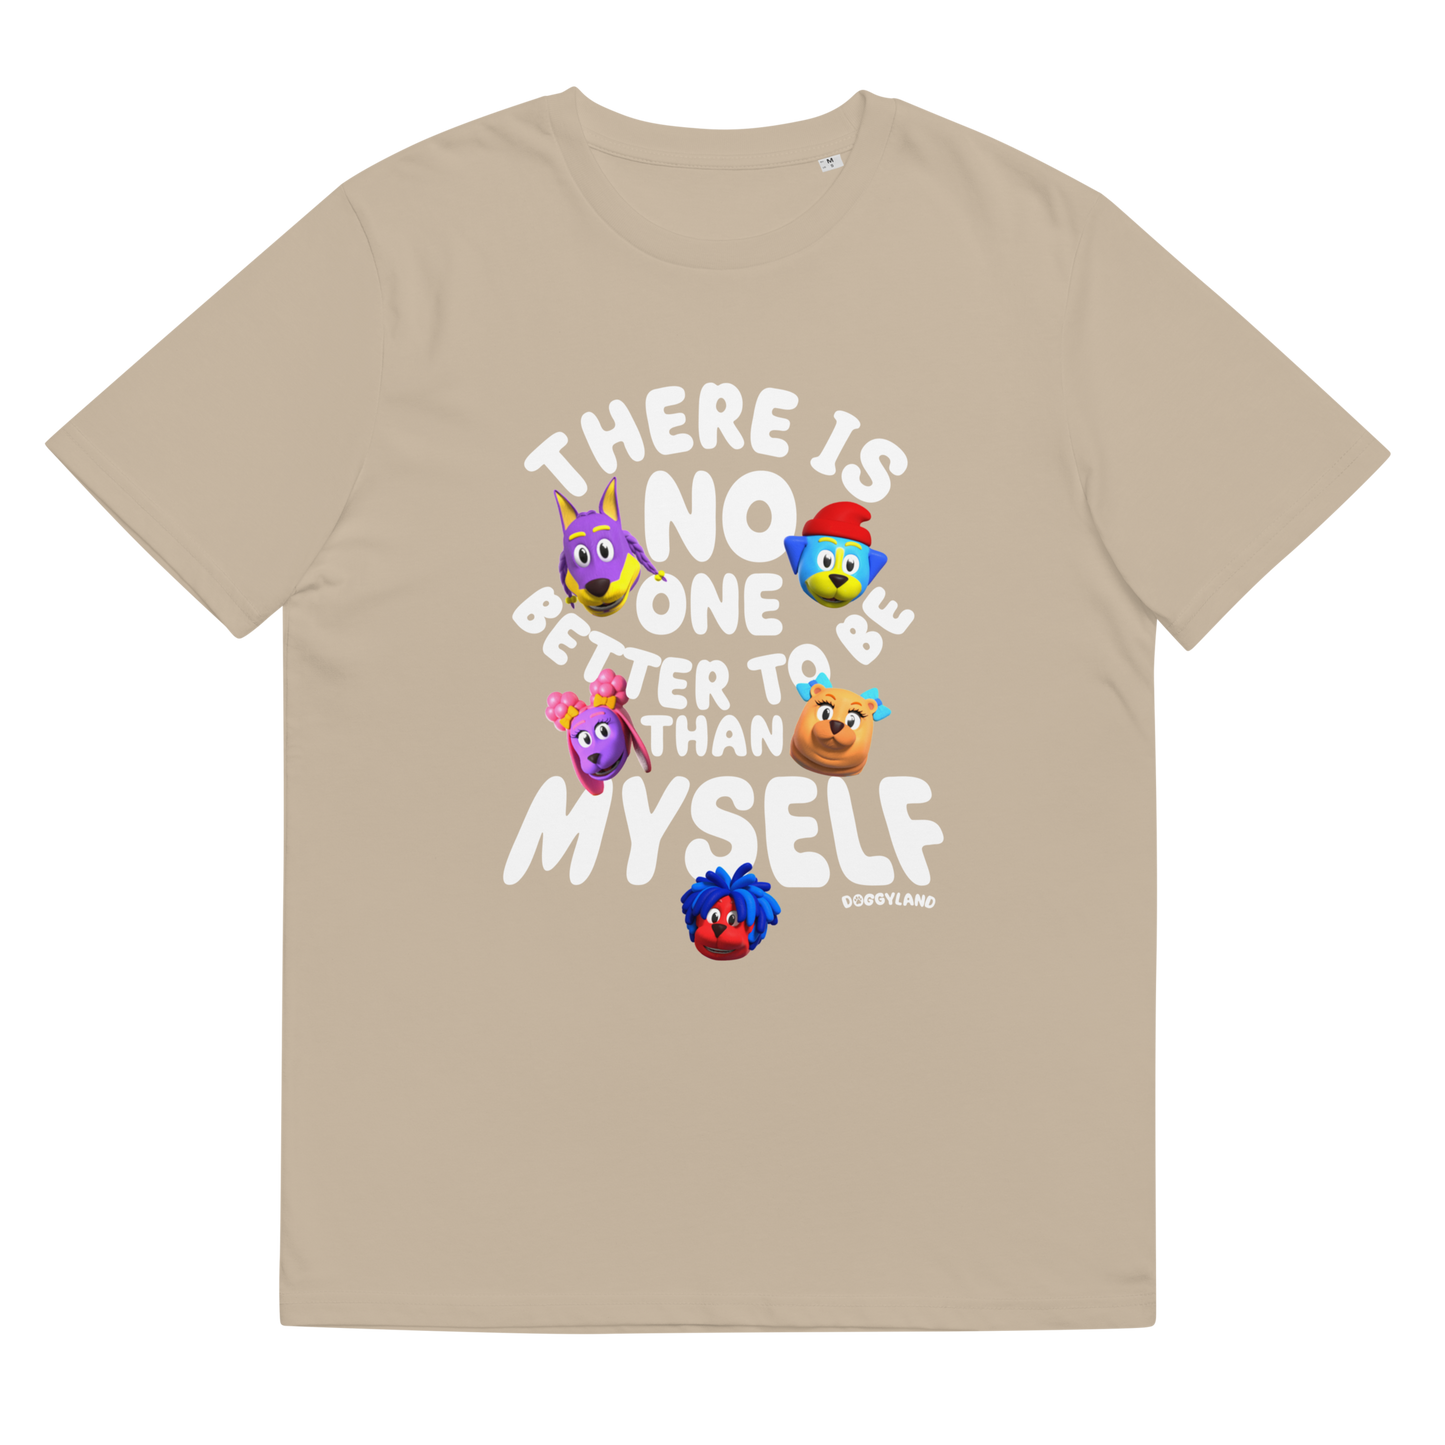 Adult Doggyland "There Is No One Better To Be Than Myself" Shirt